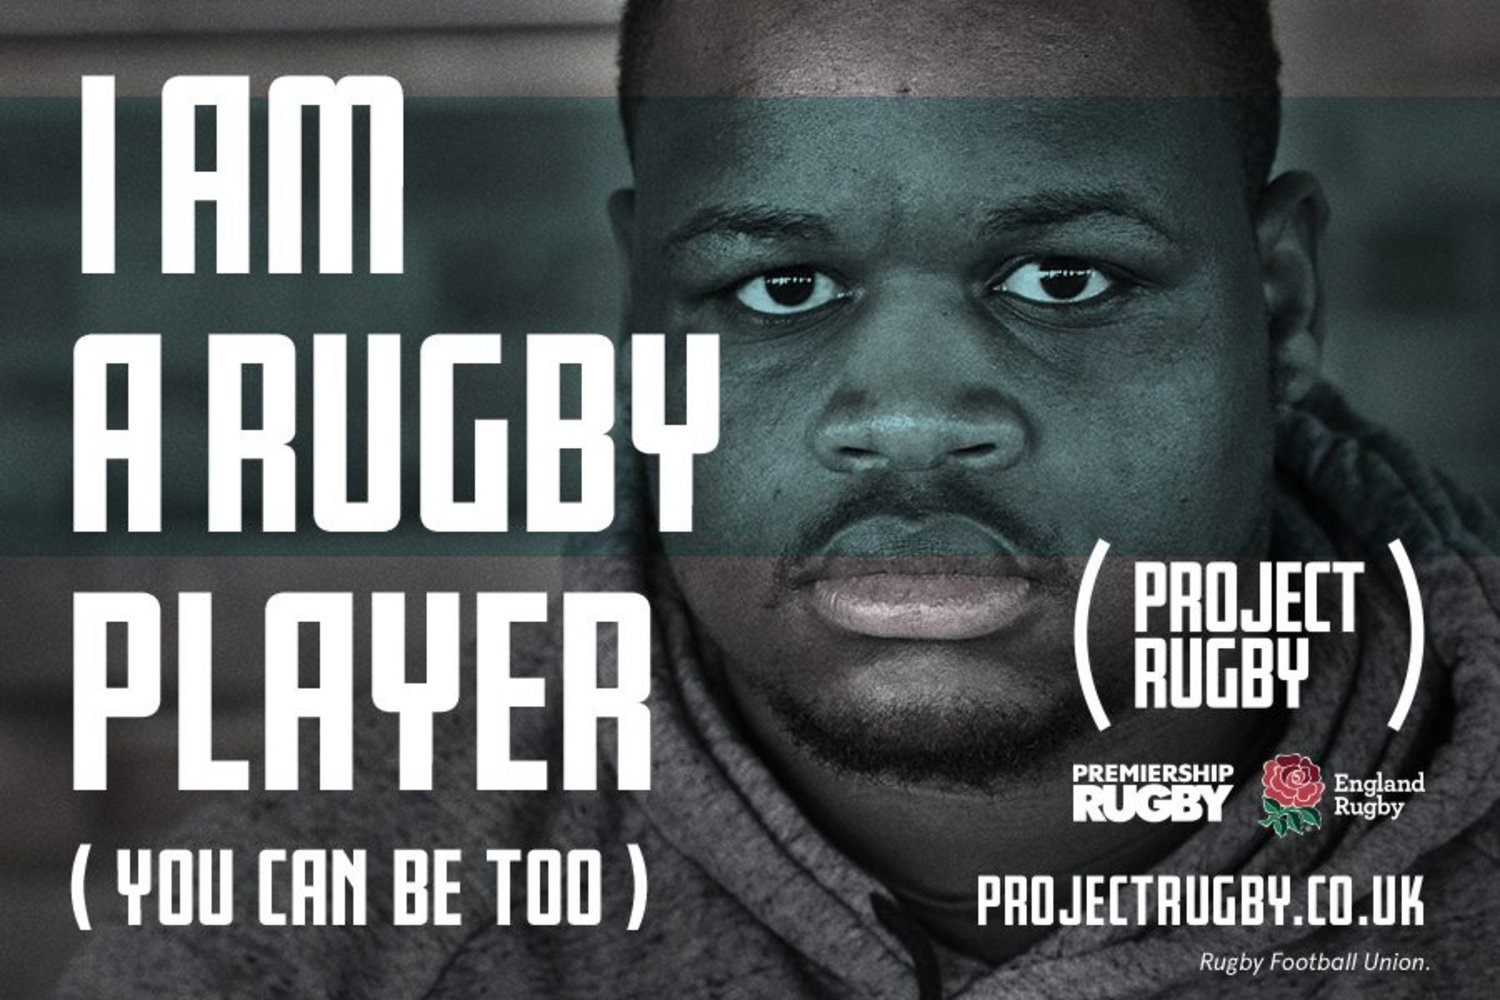 Project Rugby